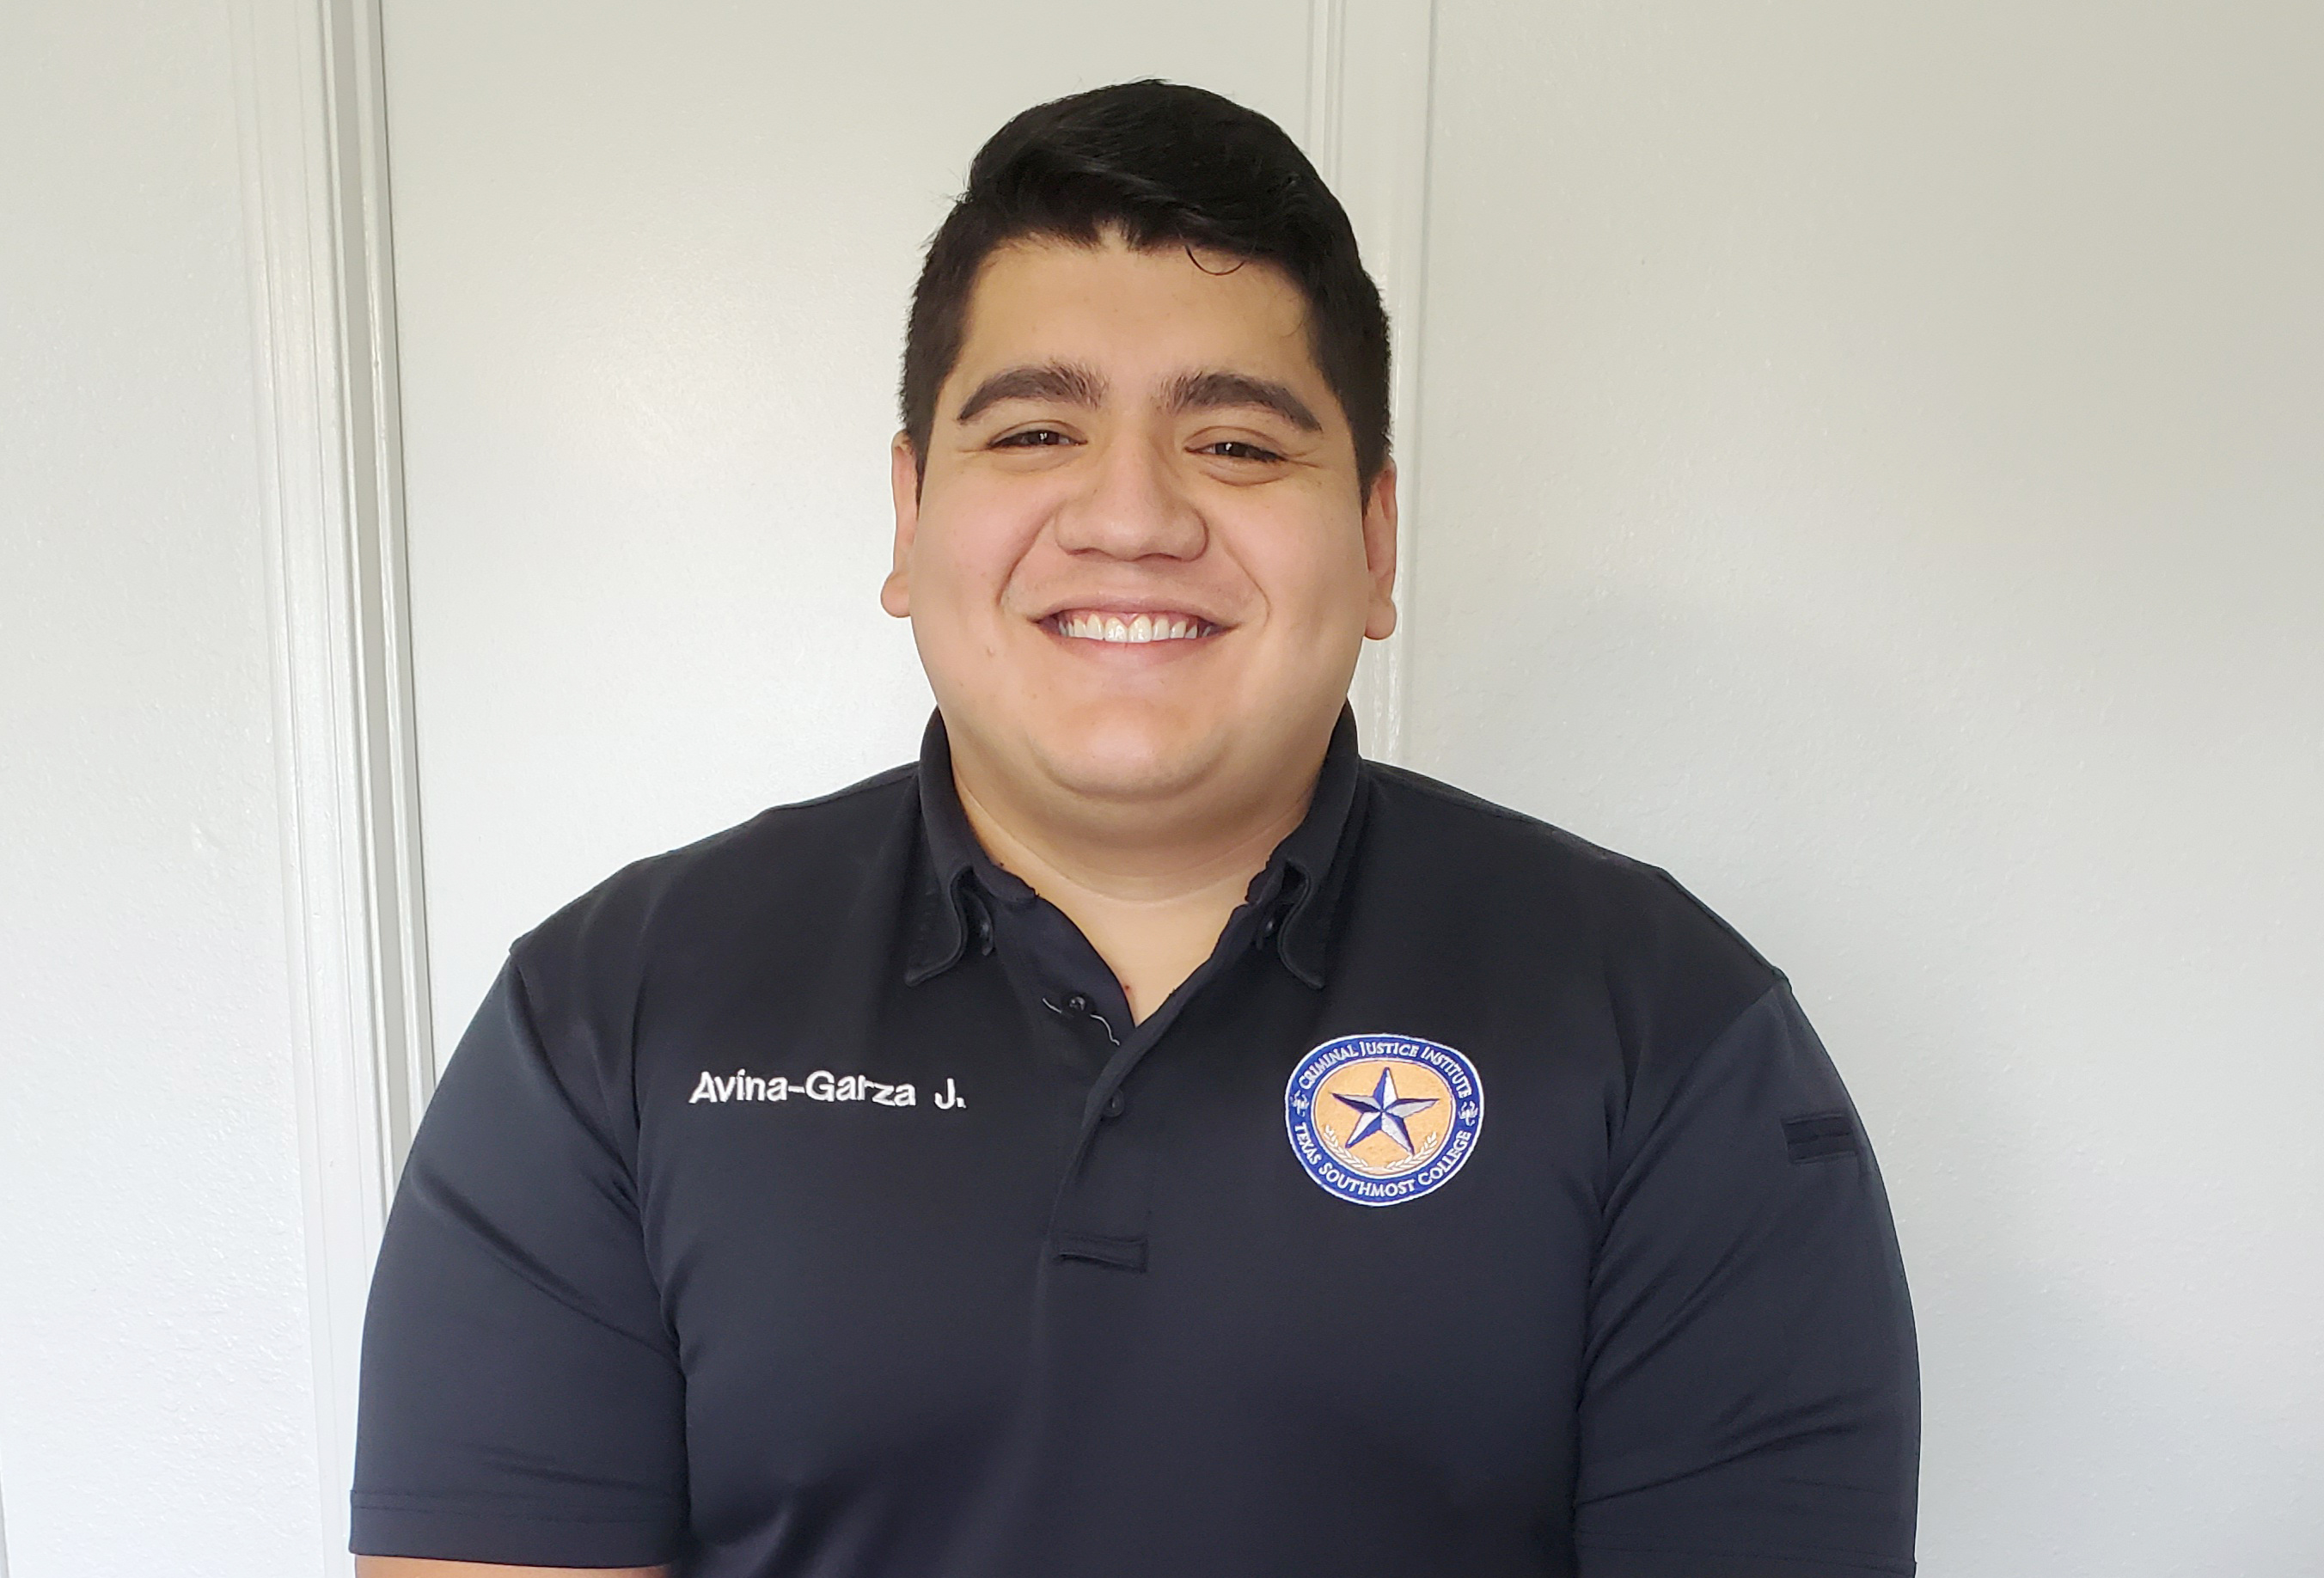 Texas Southmost College alumnus and U.S. Army veteran Christopher Martinez an associate degree in social work from TSC in 2018.